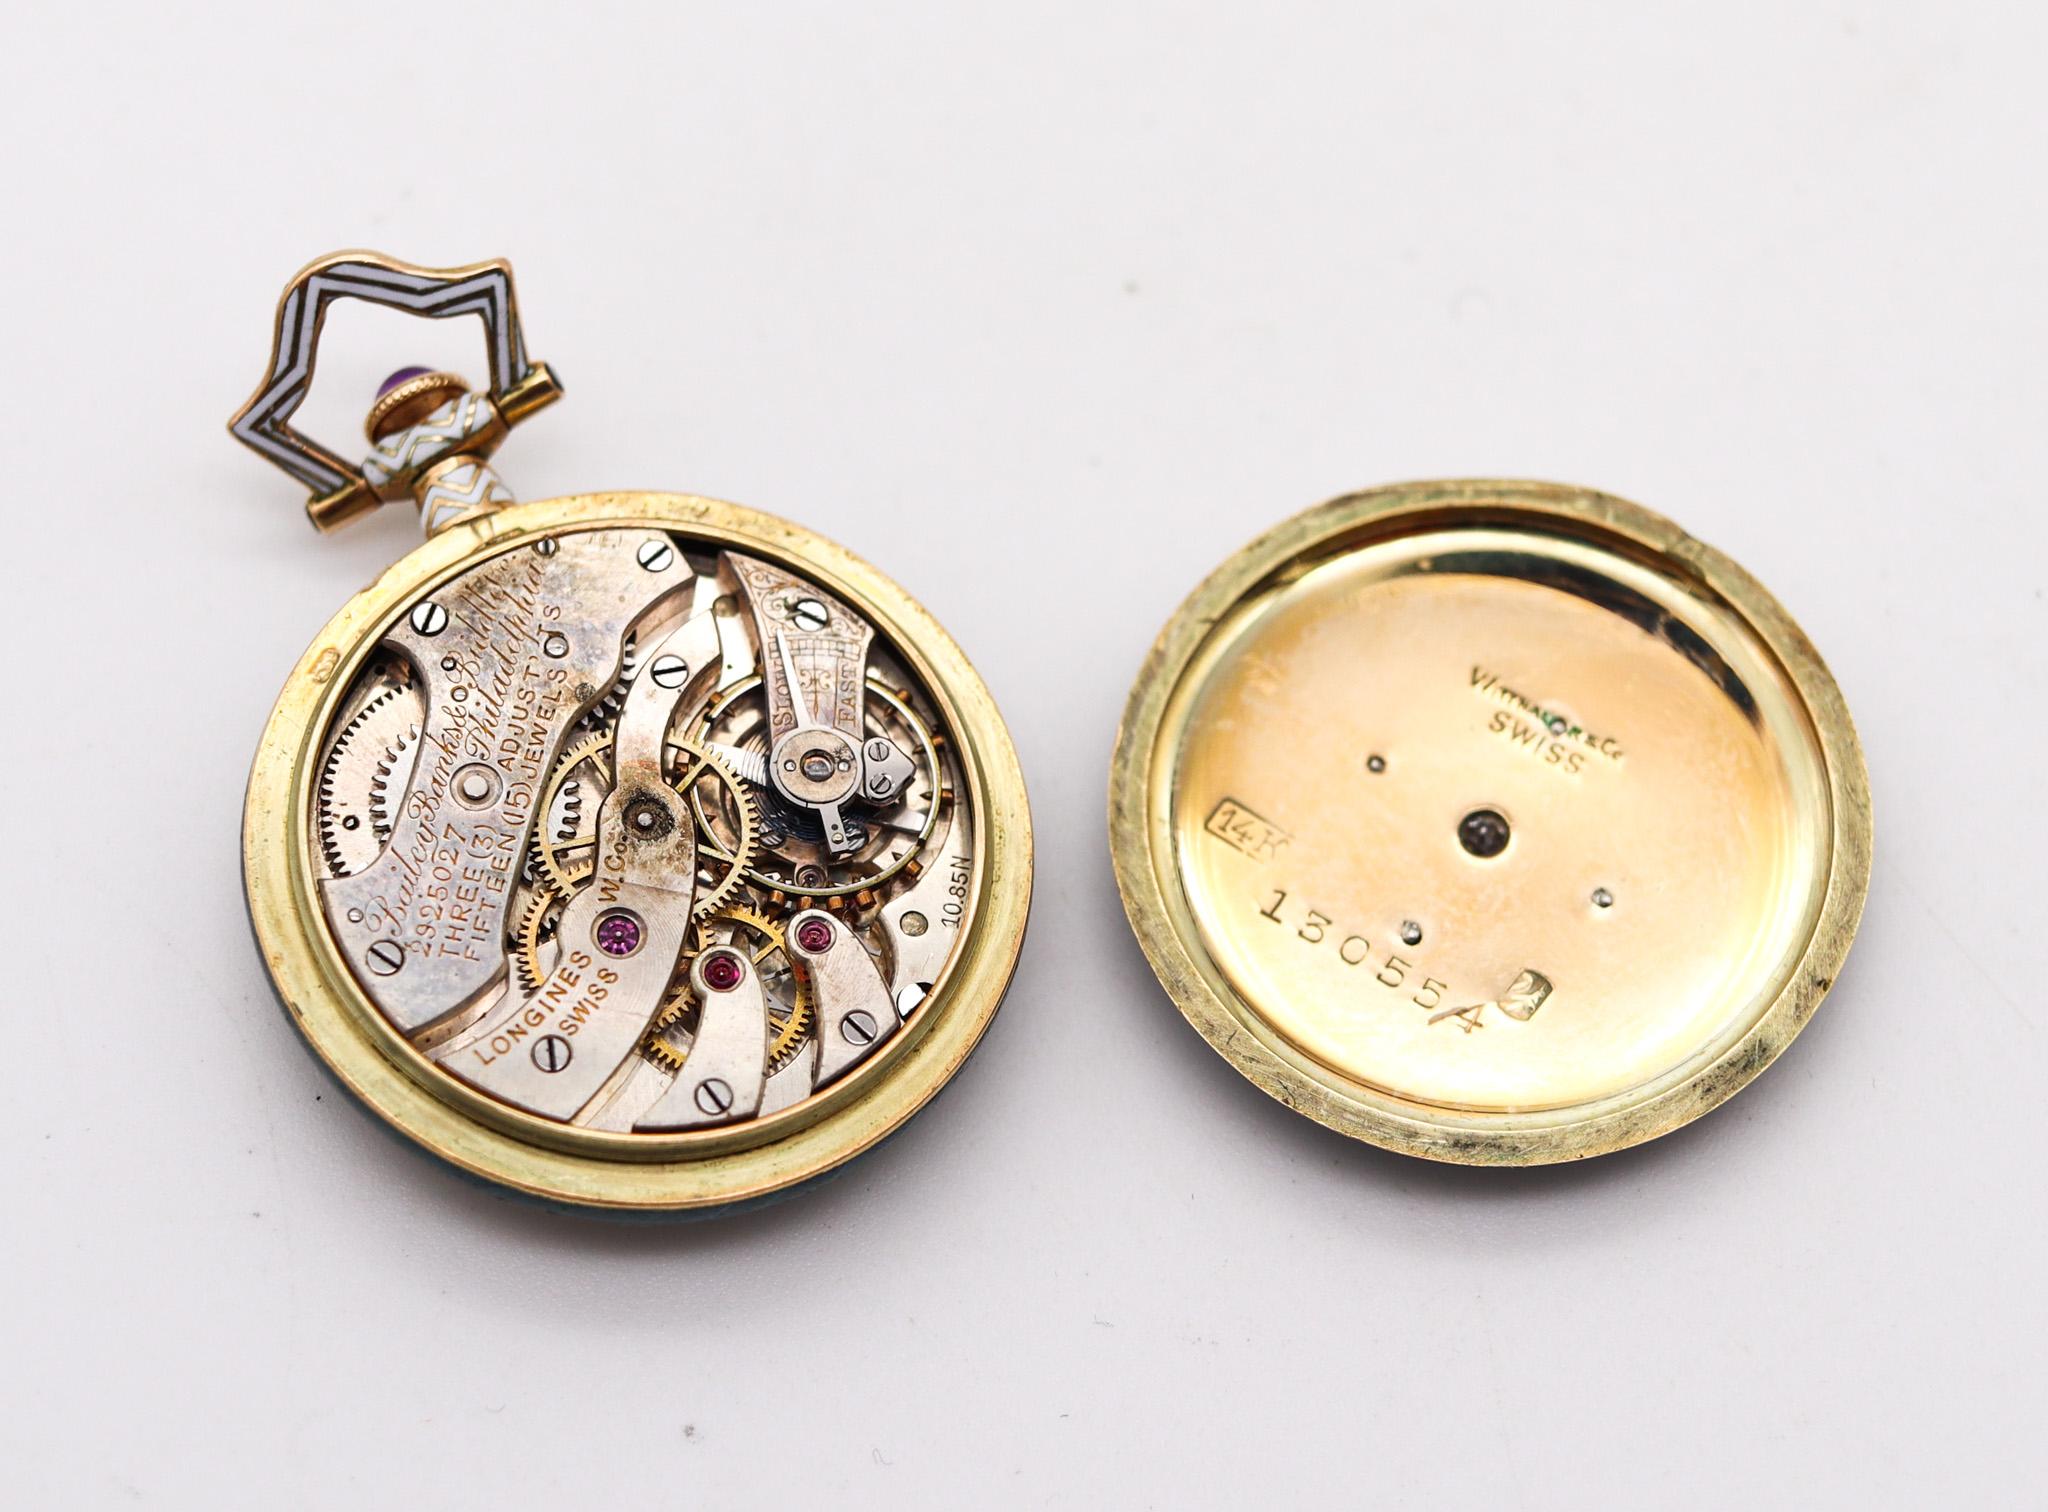 Bailey Banks & Biddle 1910 Edwardian Enamel Watch In 14Kt Gold With Diamonds For Sale 1